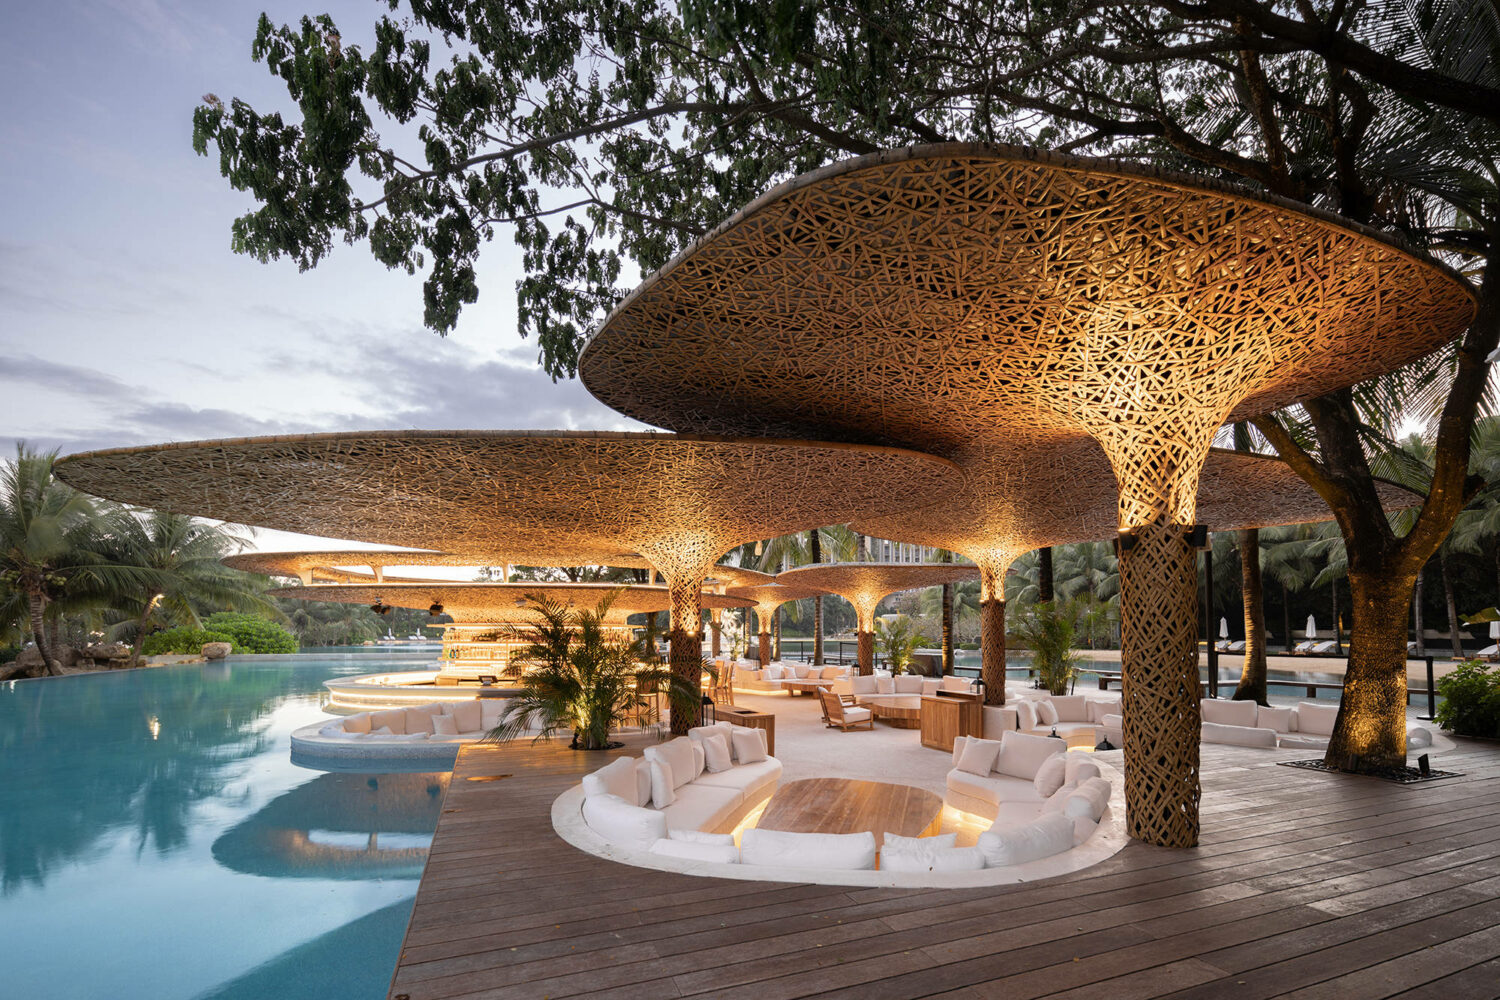 "Under the Tree" - Beach Club at The Sanya EDITION by Various Associates